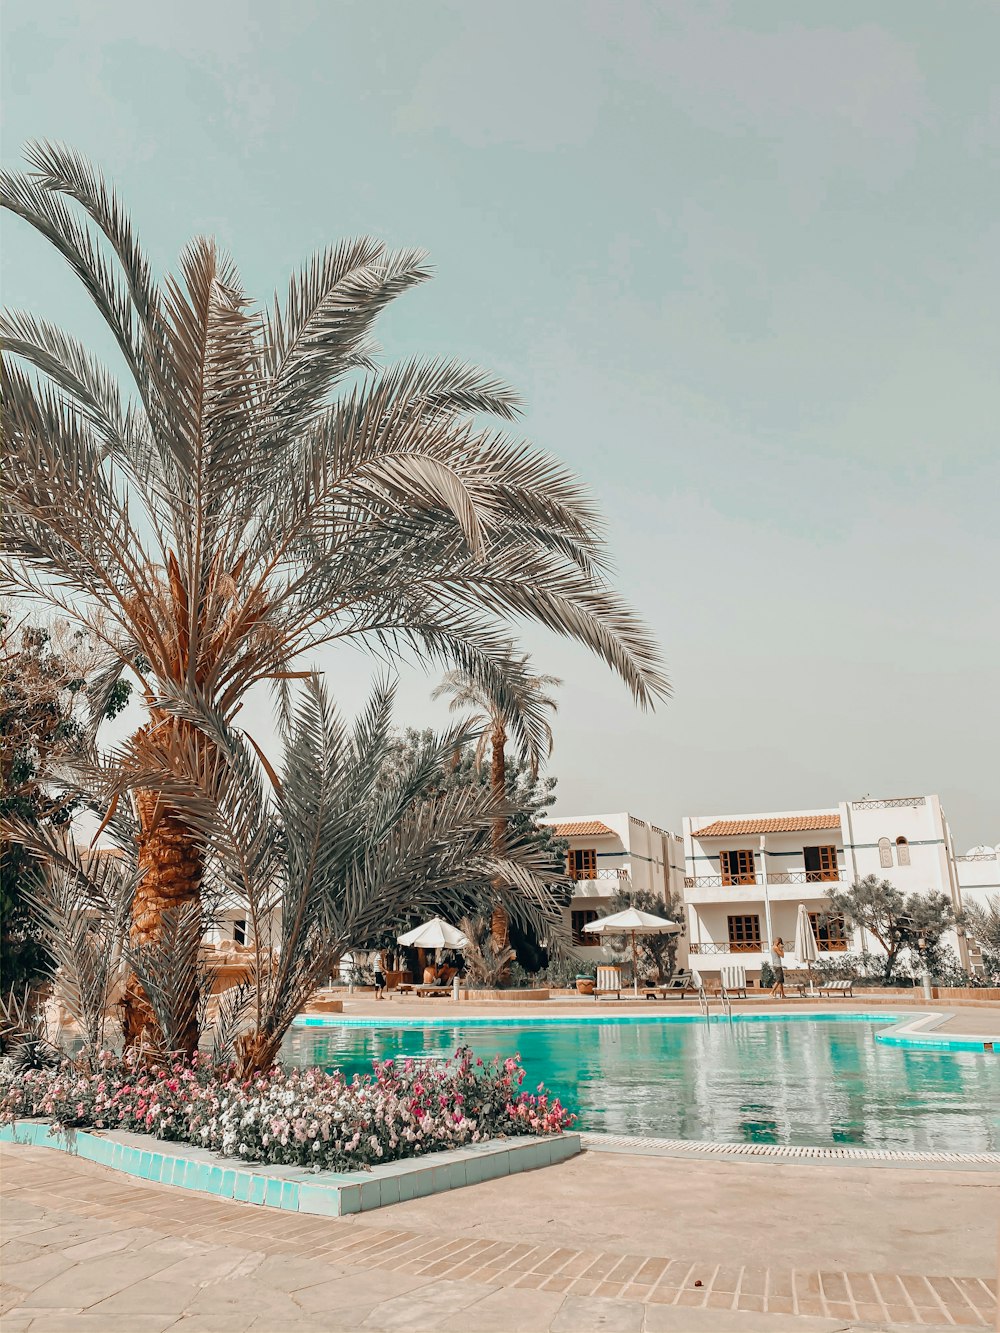 palm trees near swimming pool during daytime